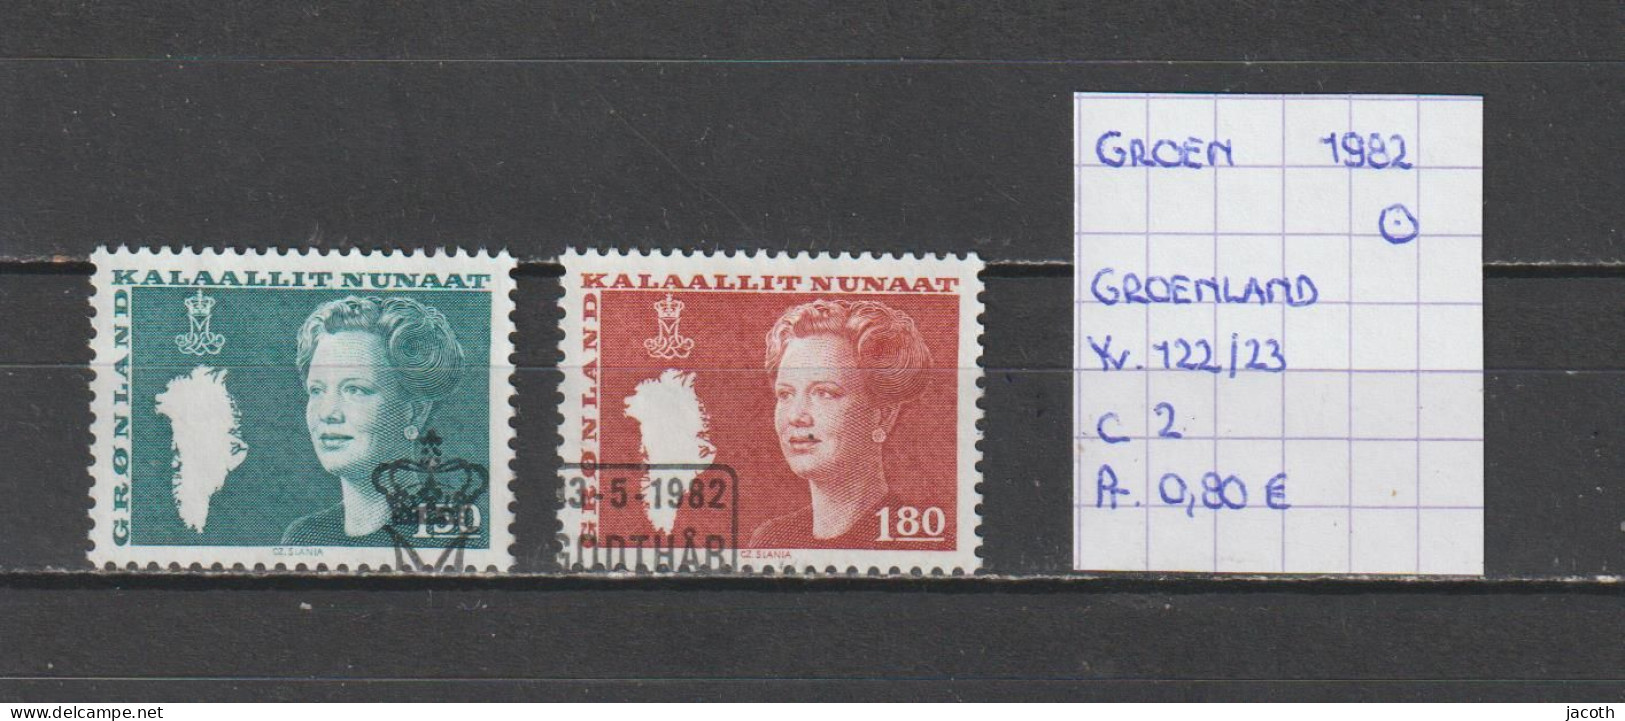 (TJ) Groenland 1982 - YT 122/23 (gest./obl./used) - Used Stamps